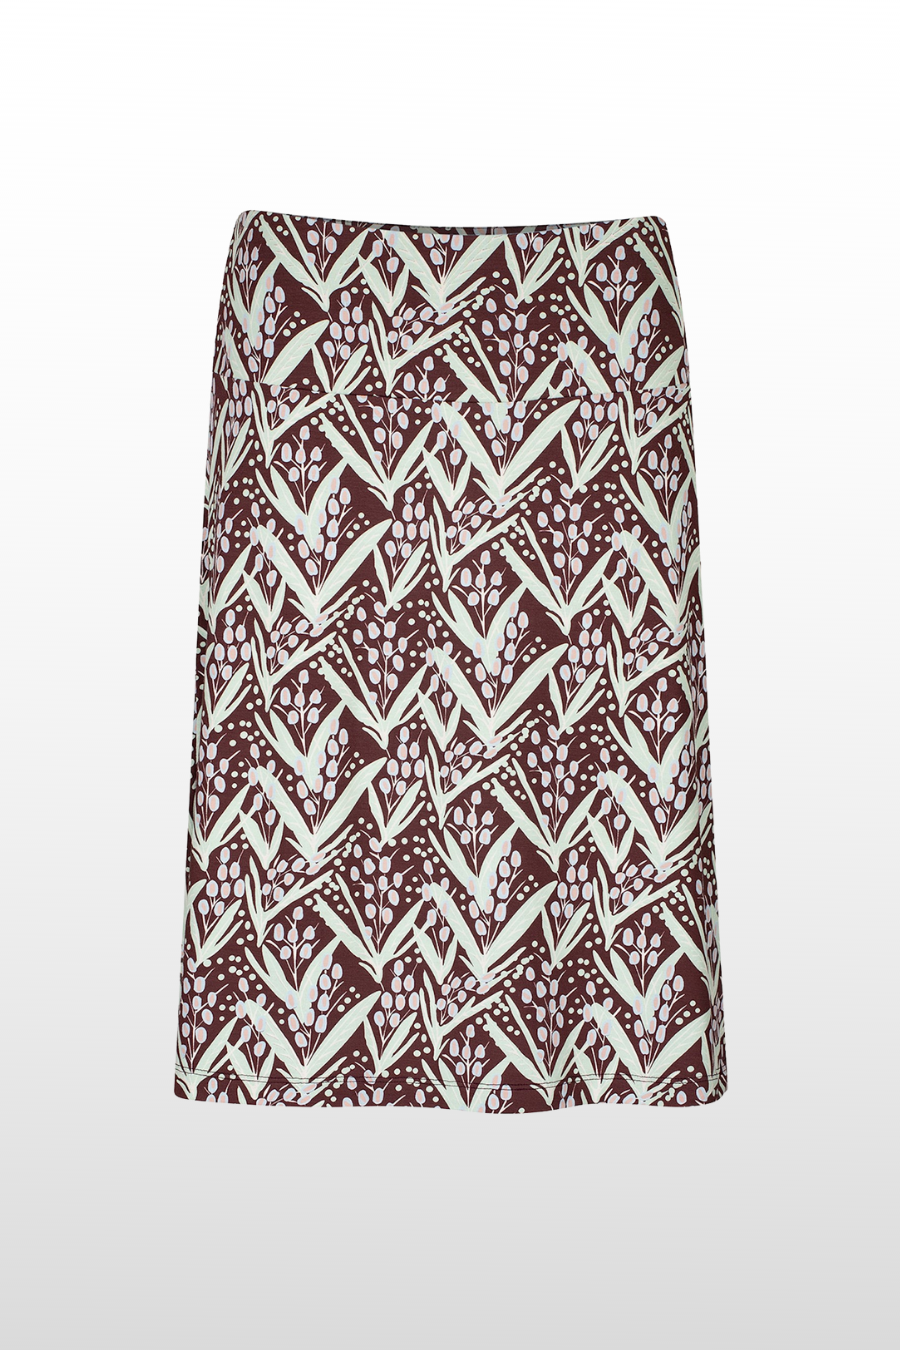 Zilch Clothing, A-line Skirt